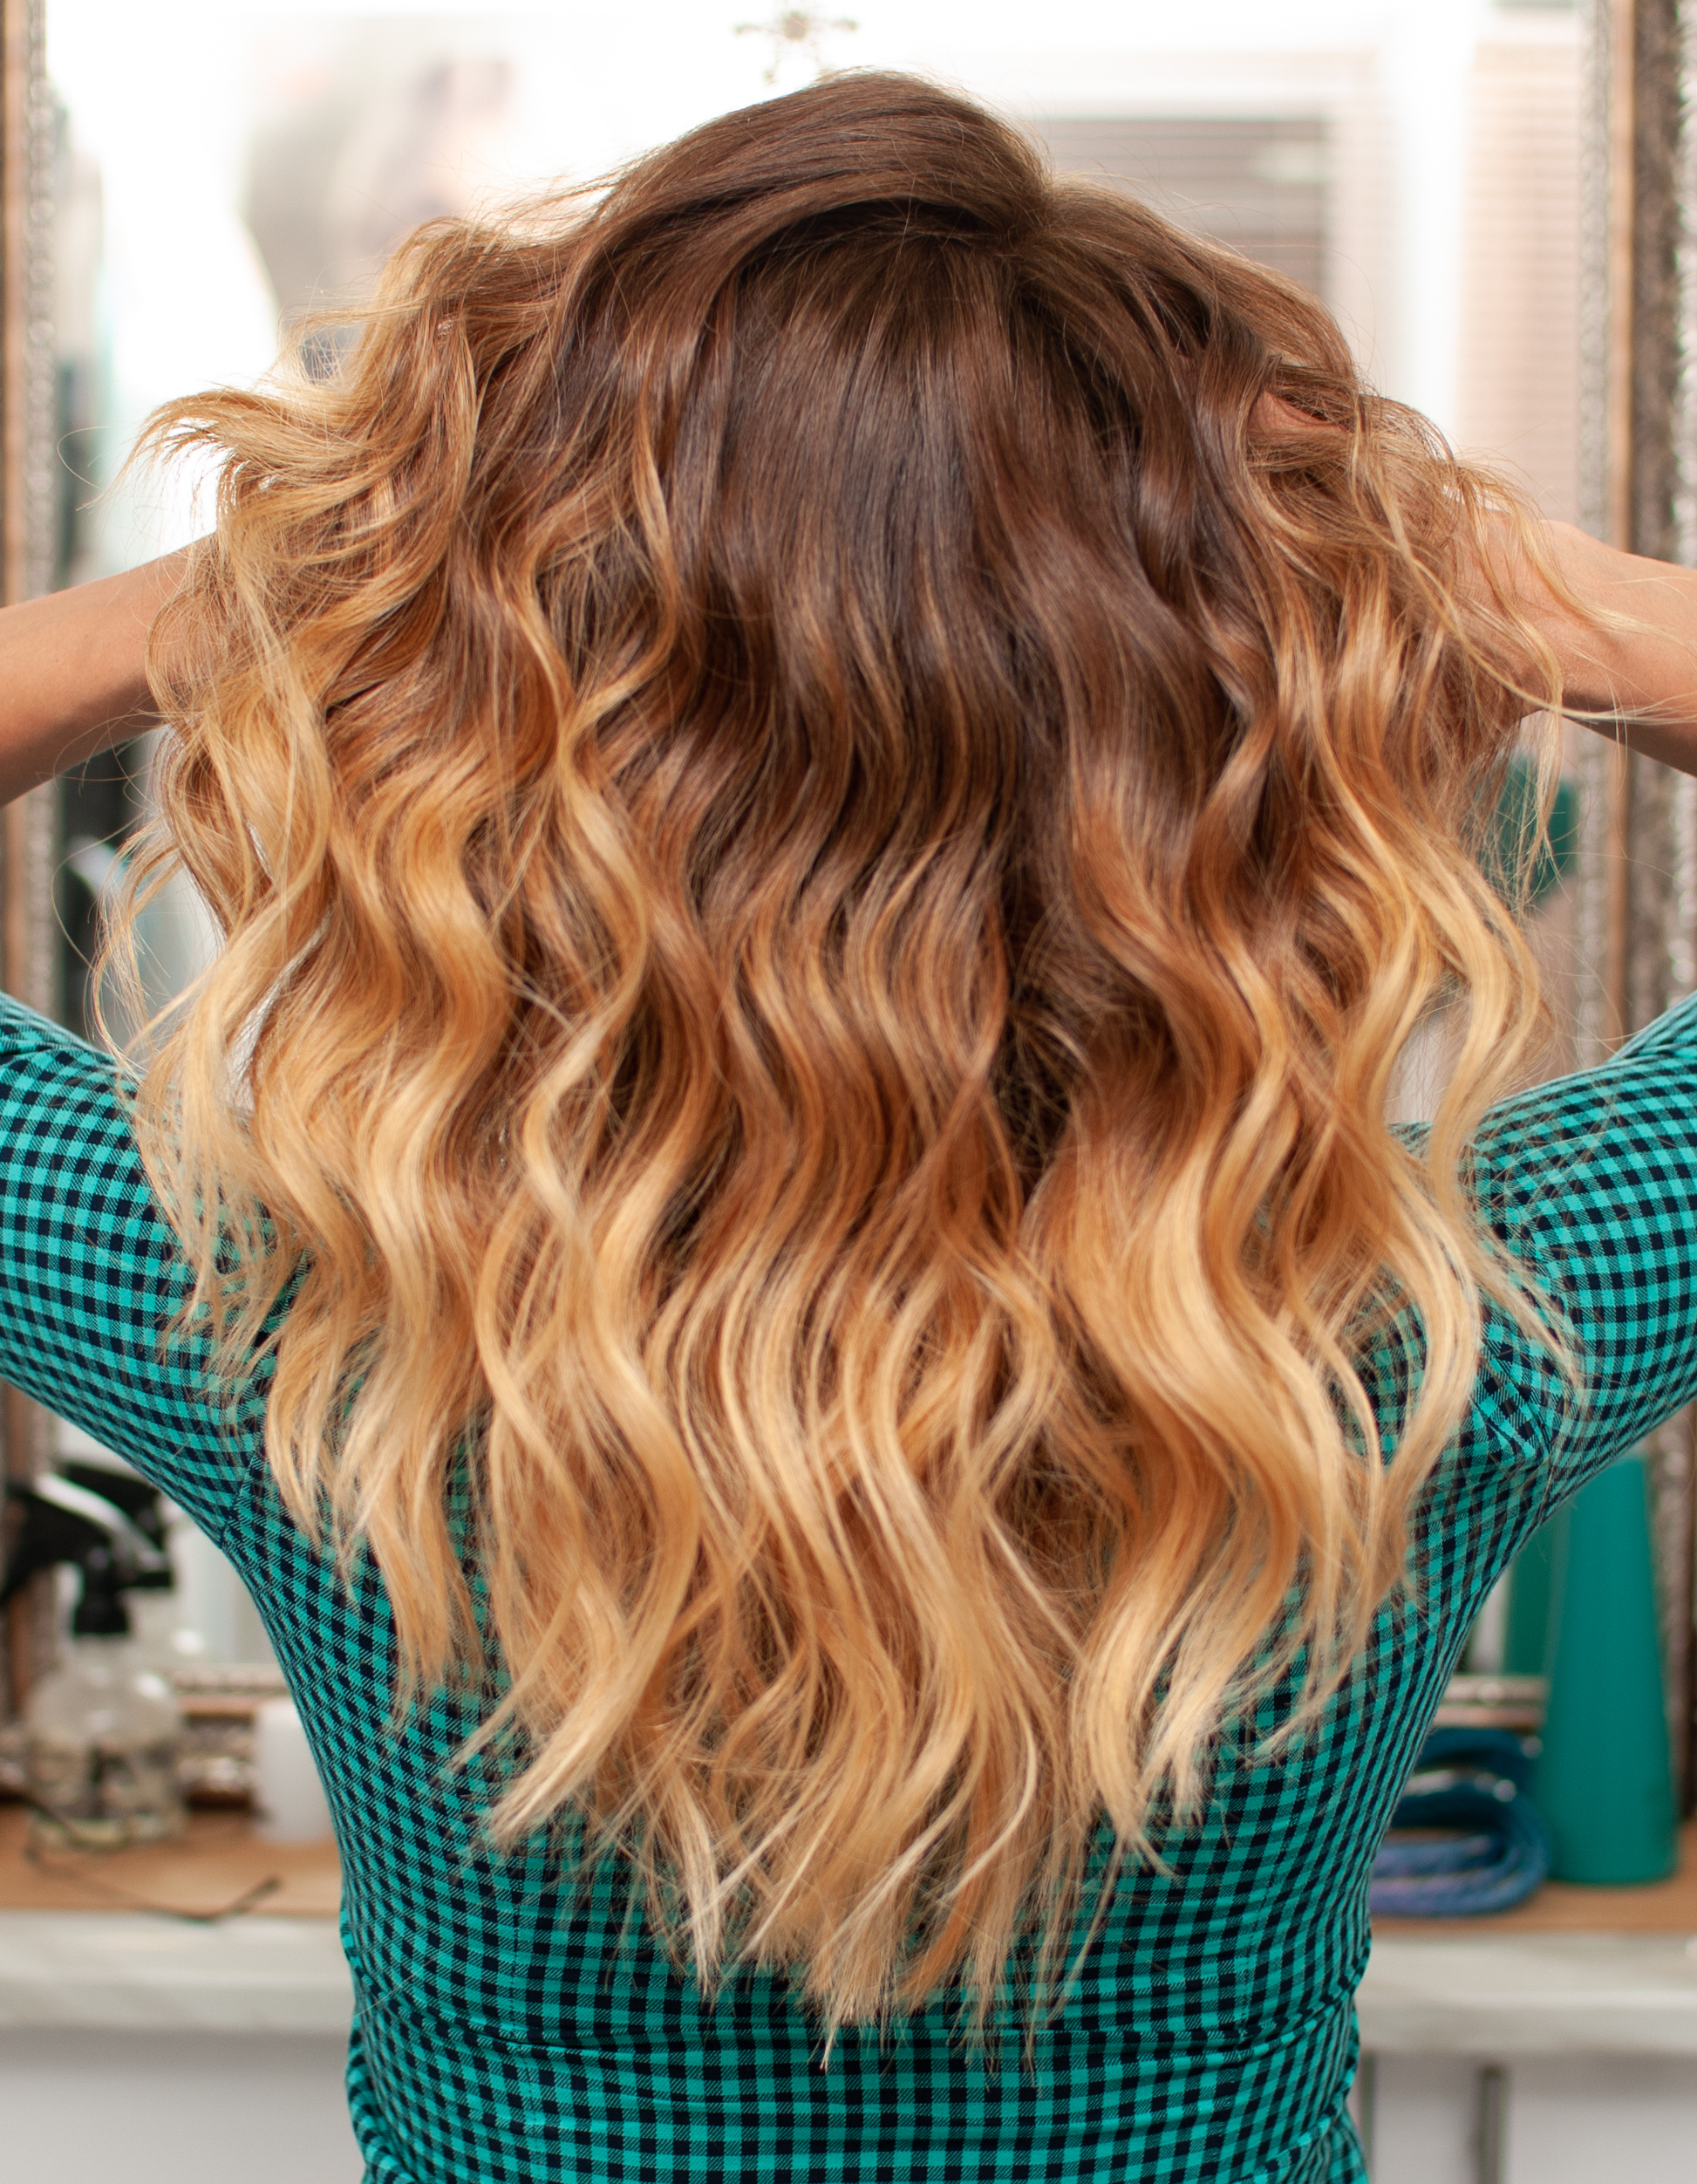 Ombré hair that transitions from brown, to auburn, to strawberry blonde.